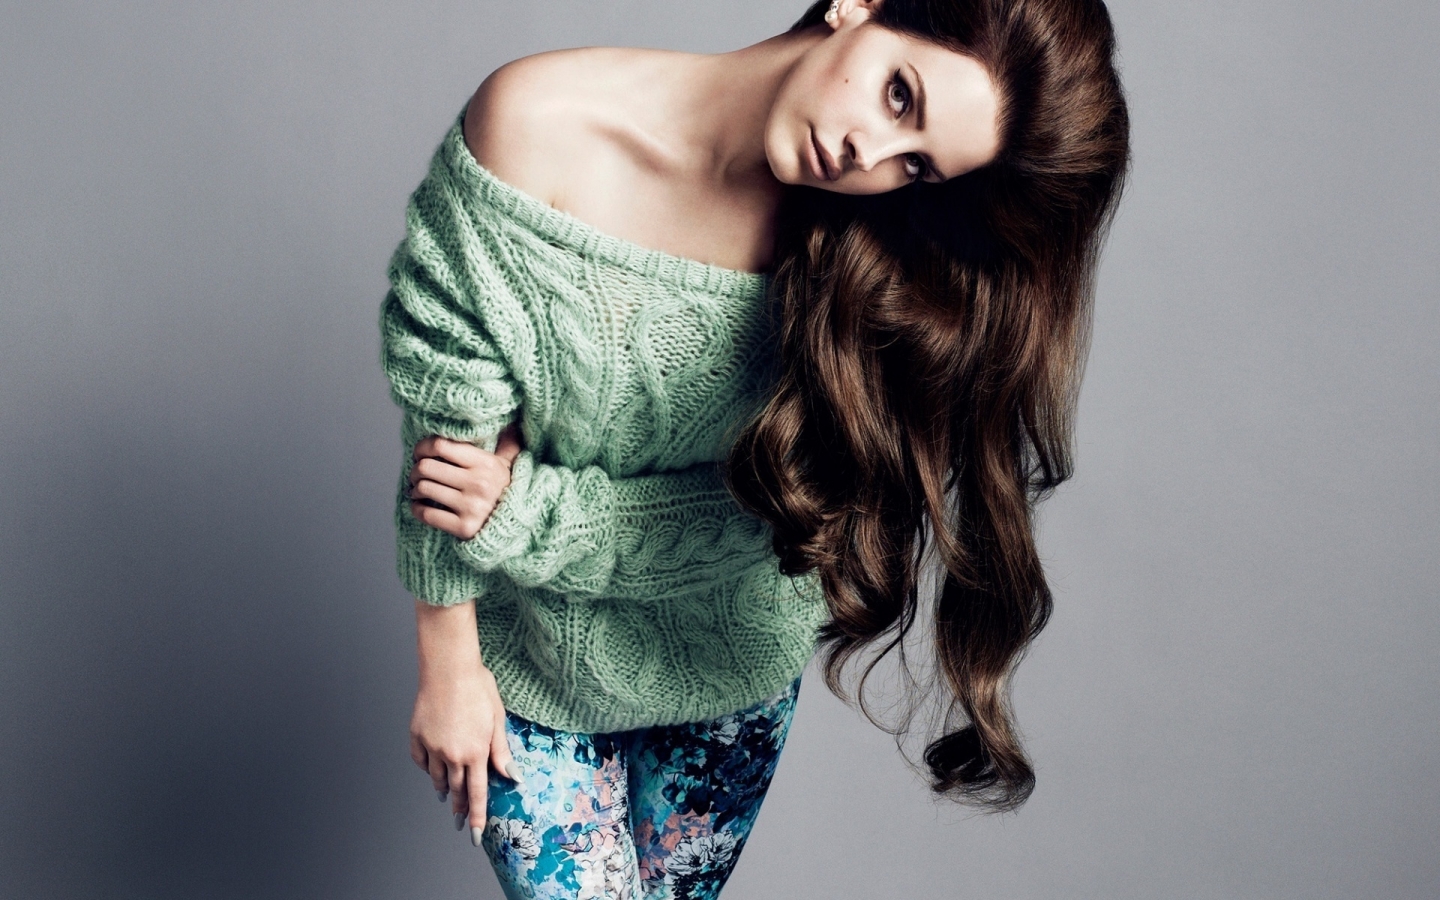 Lana Del Rey Hair Style for 1440 x 900 widescreen resolution